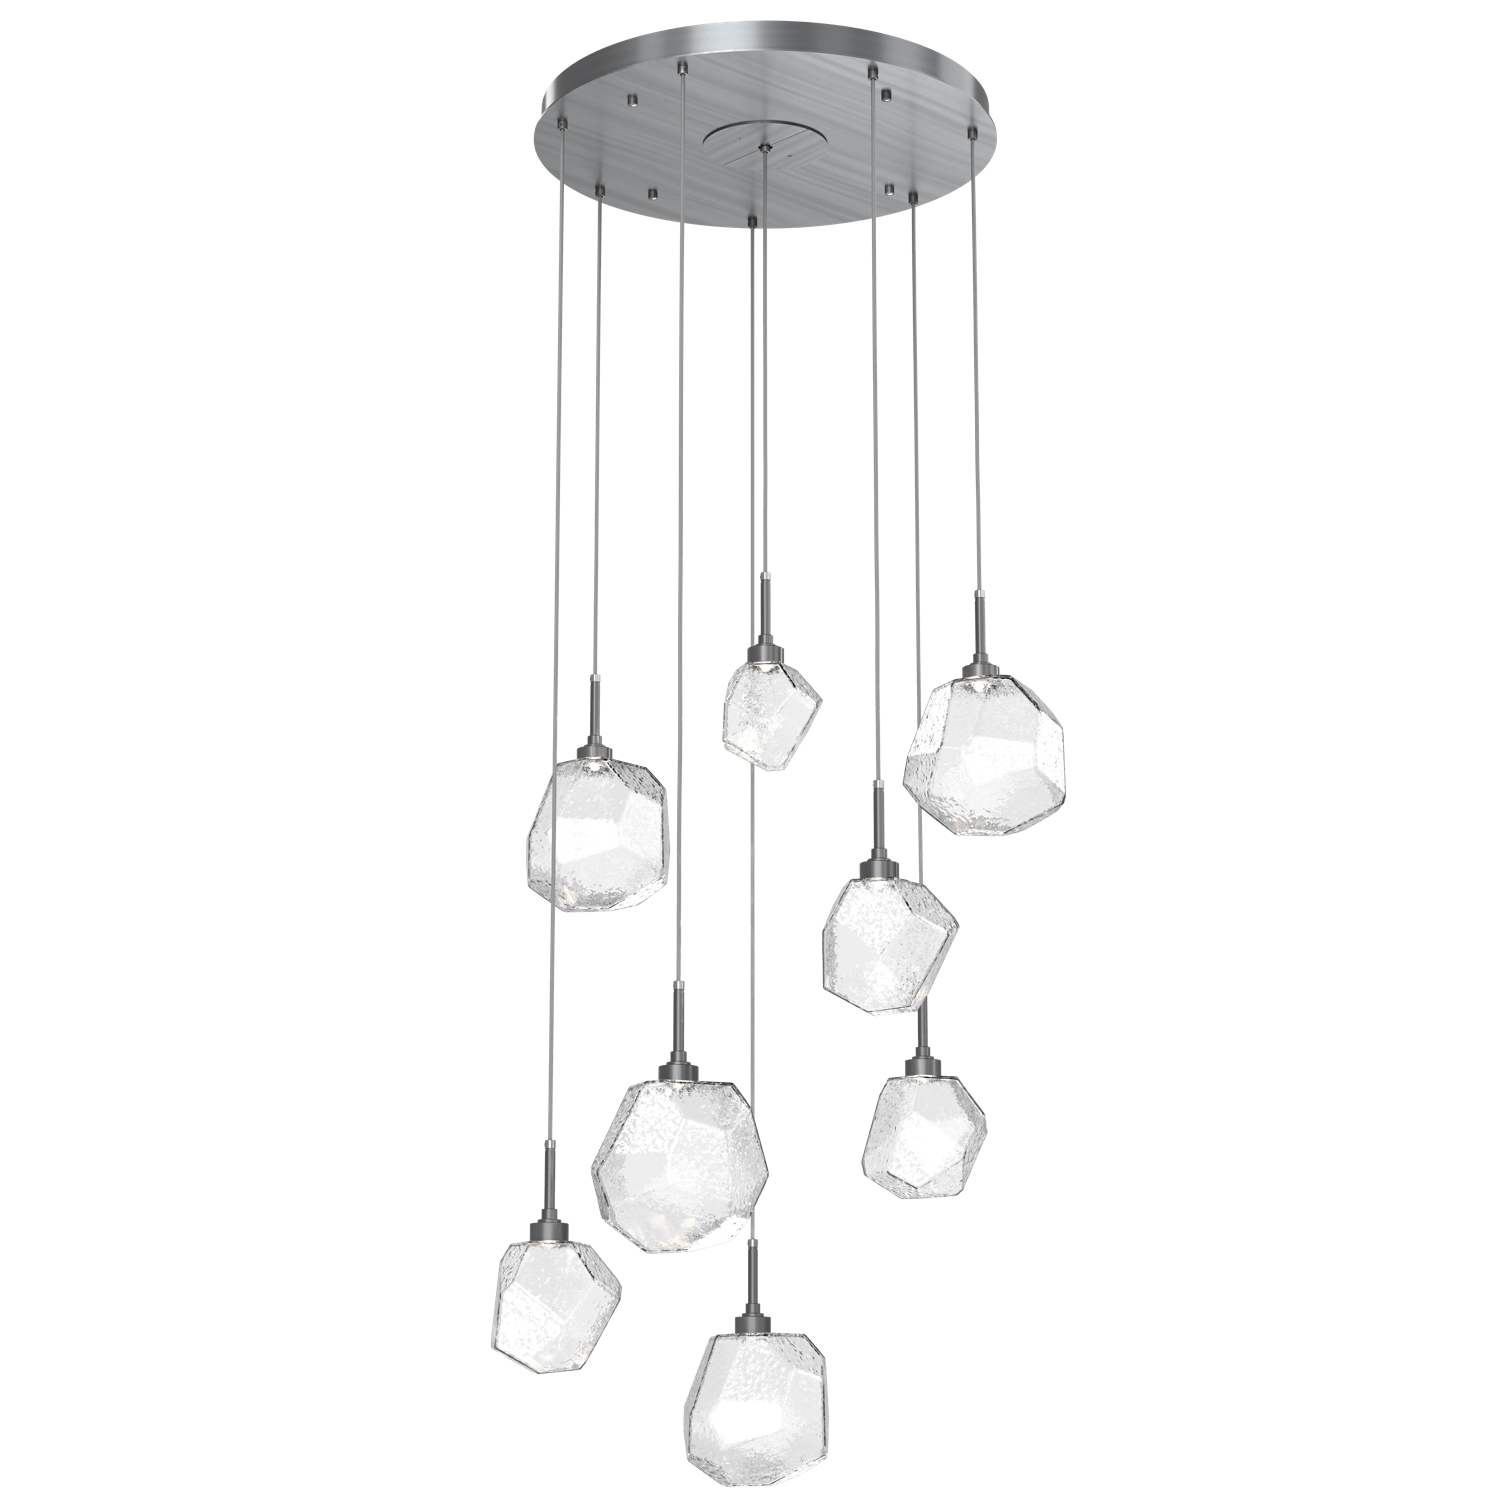 CHB0039-08-GM-C-Hammerton-Studio-Gem-8-light-round-pendant-chandelier-with-gunmetal-finish-and-clear-blown-glass-shades-and-LED-lamping